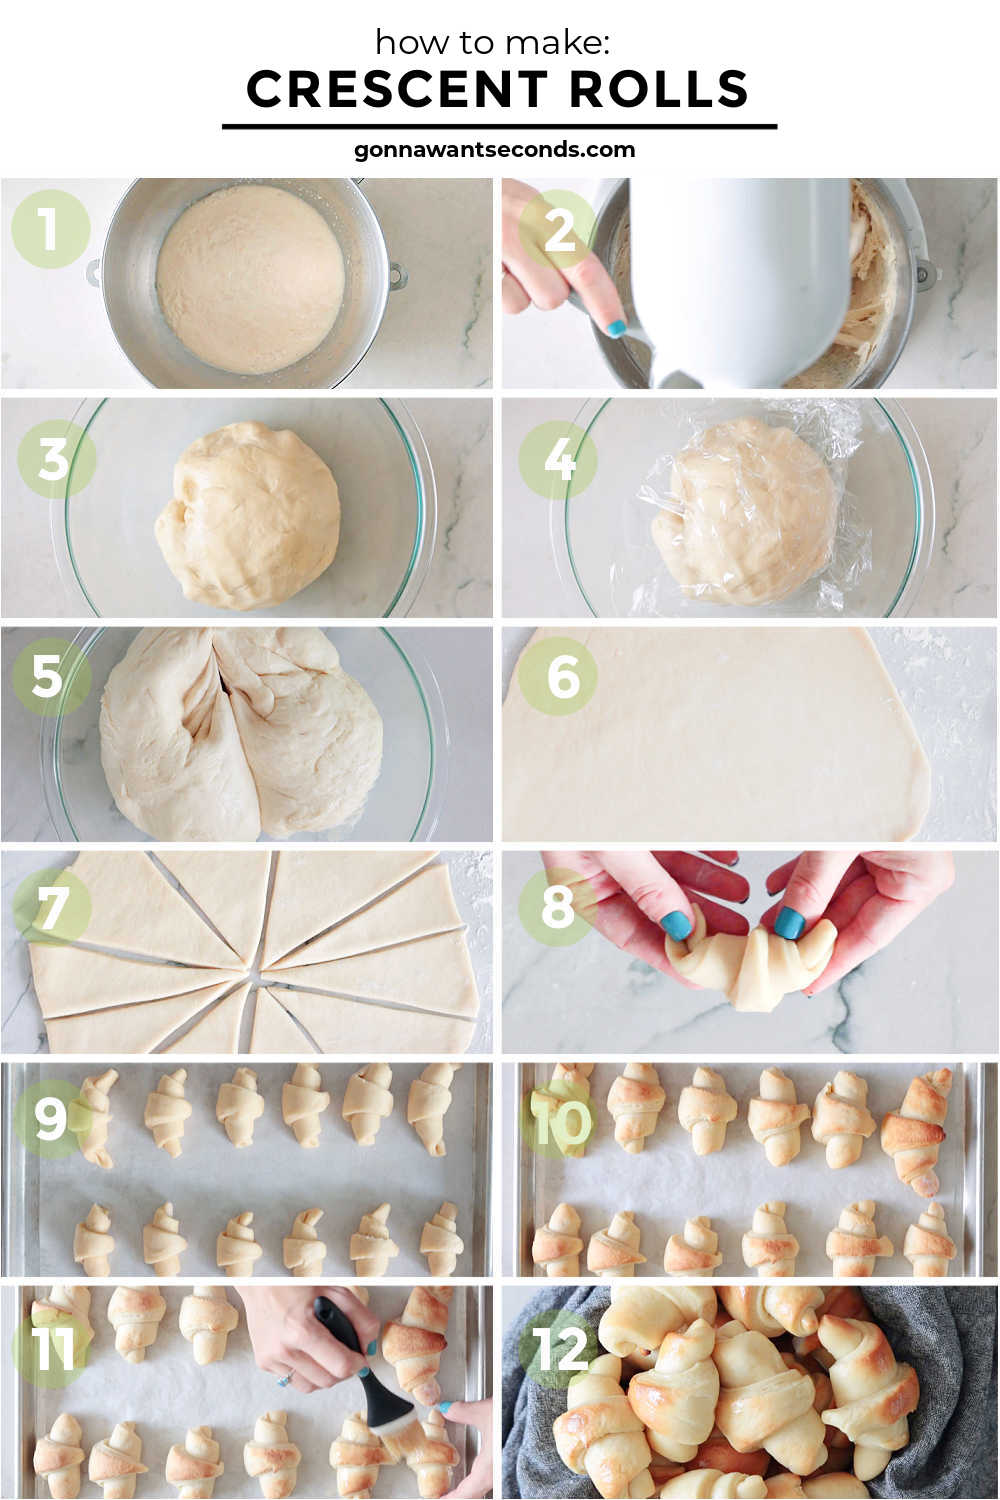 step by step how to make crescent rolls